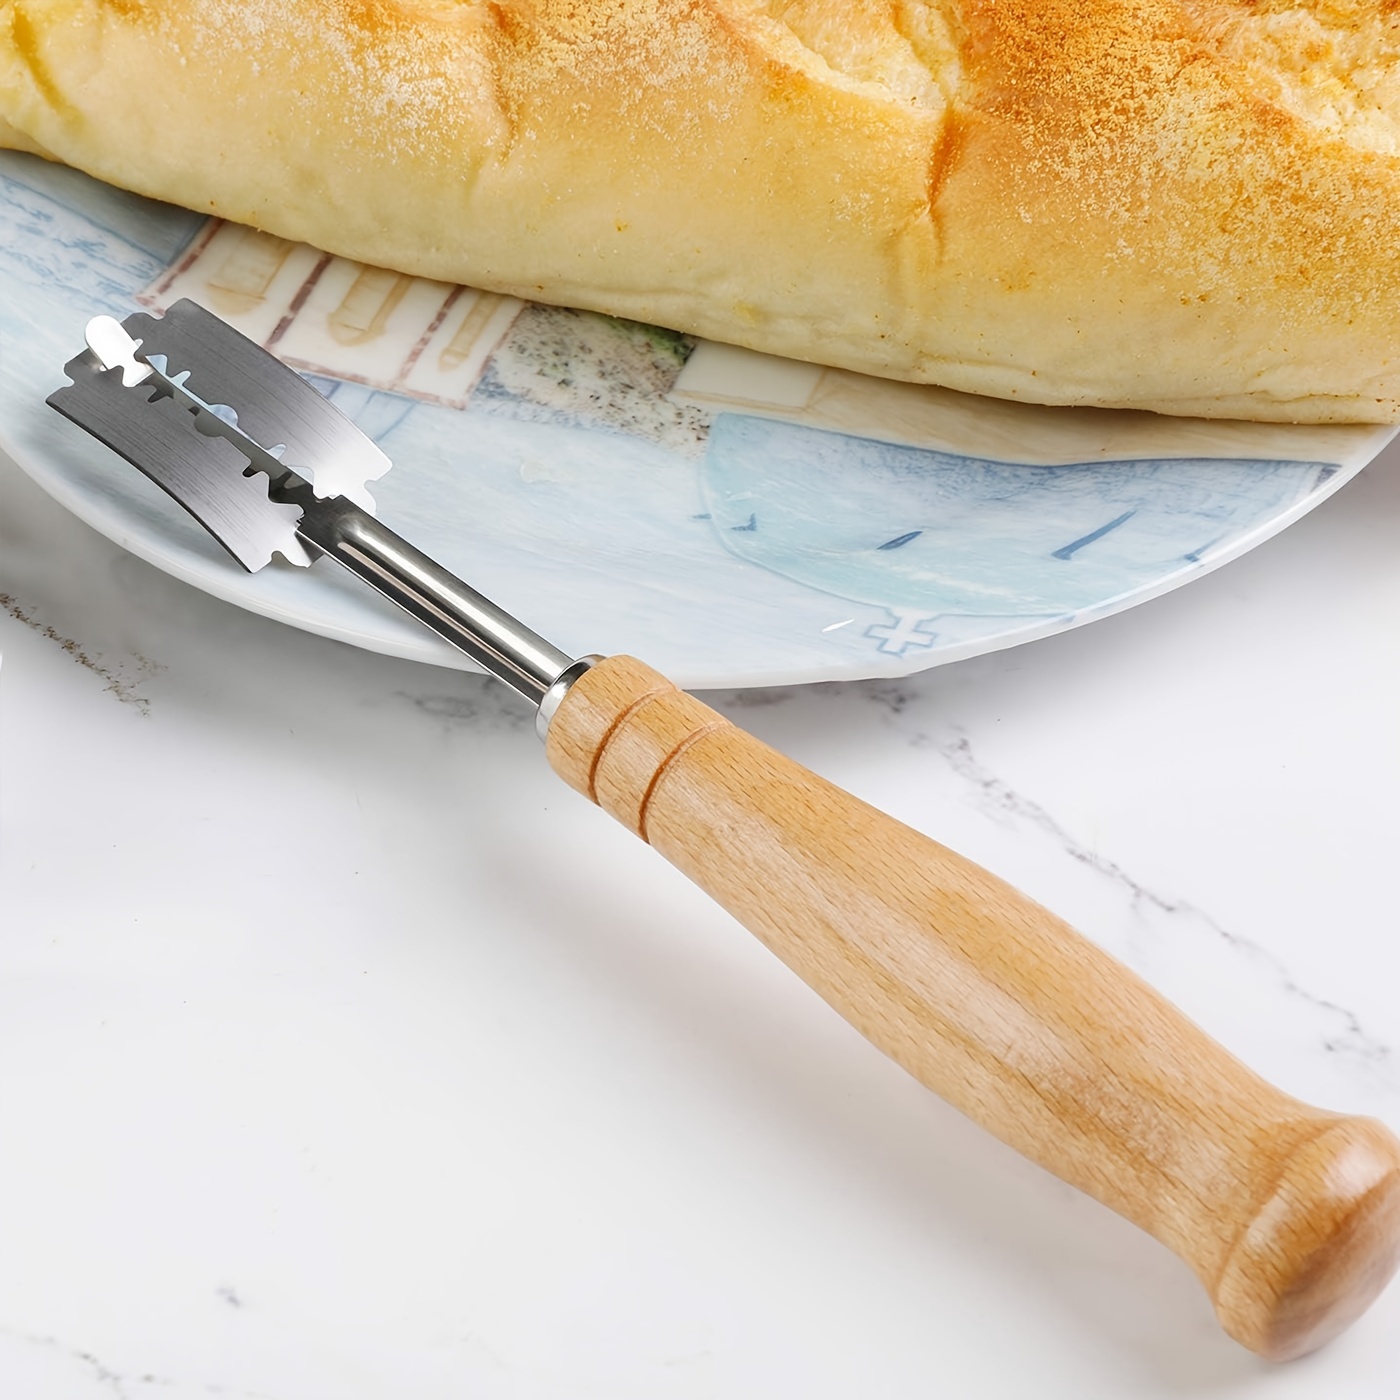 1pc Stainless Steel Bread Lame Dough Scoring Tool With Wooden Handle,  Curved Bread Cutting Razor